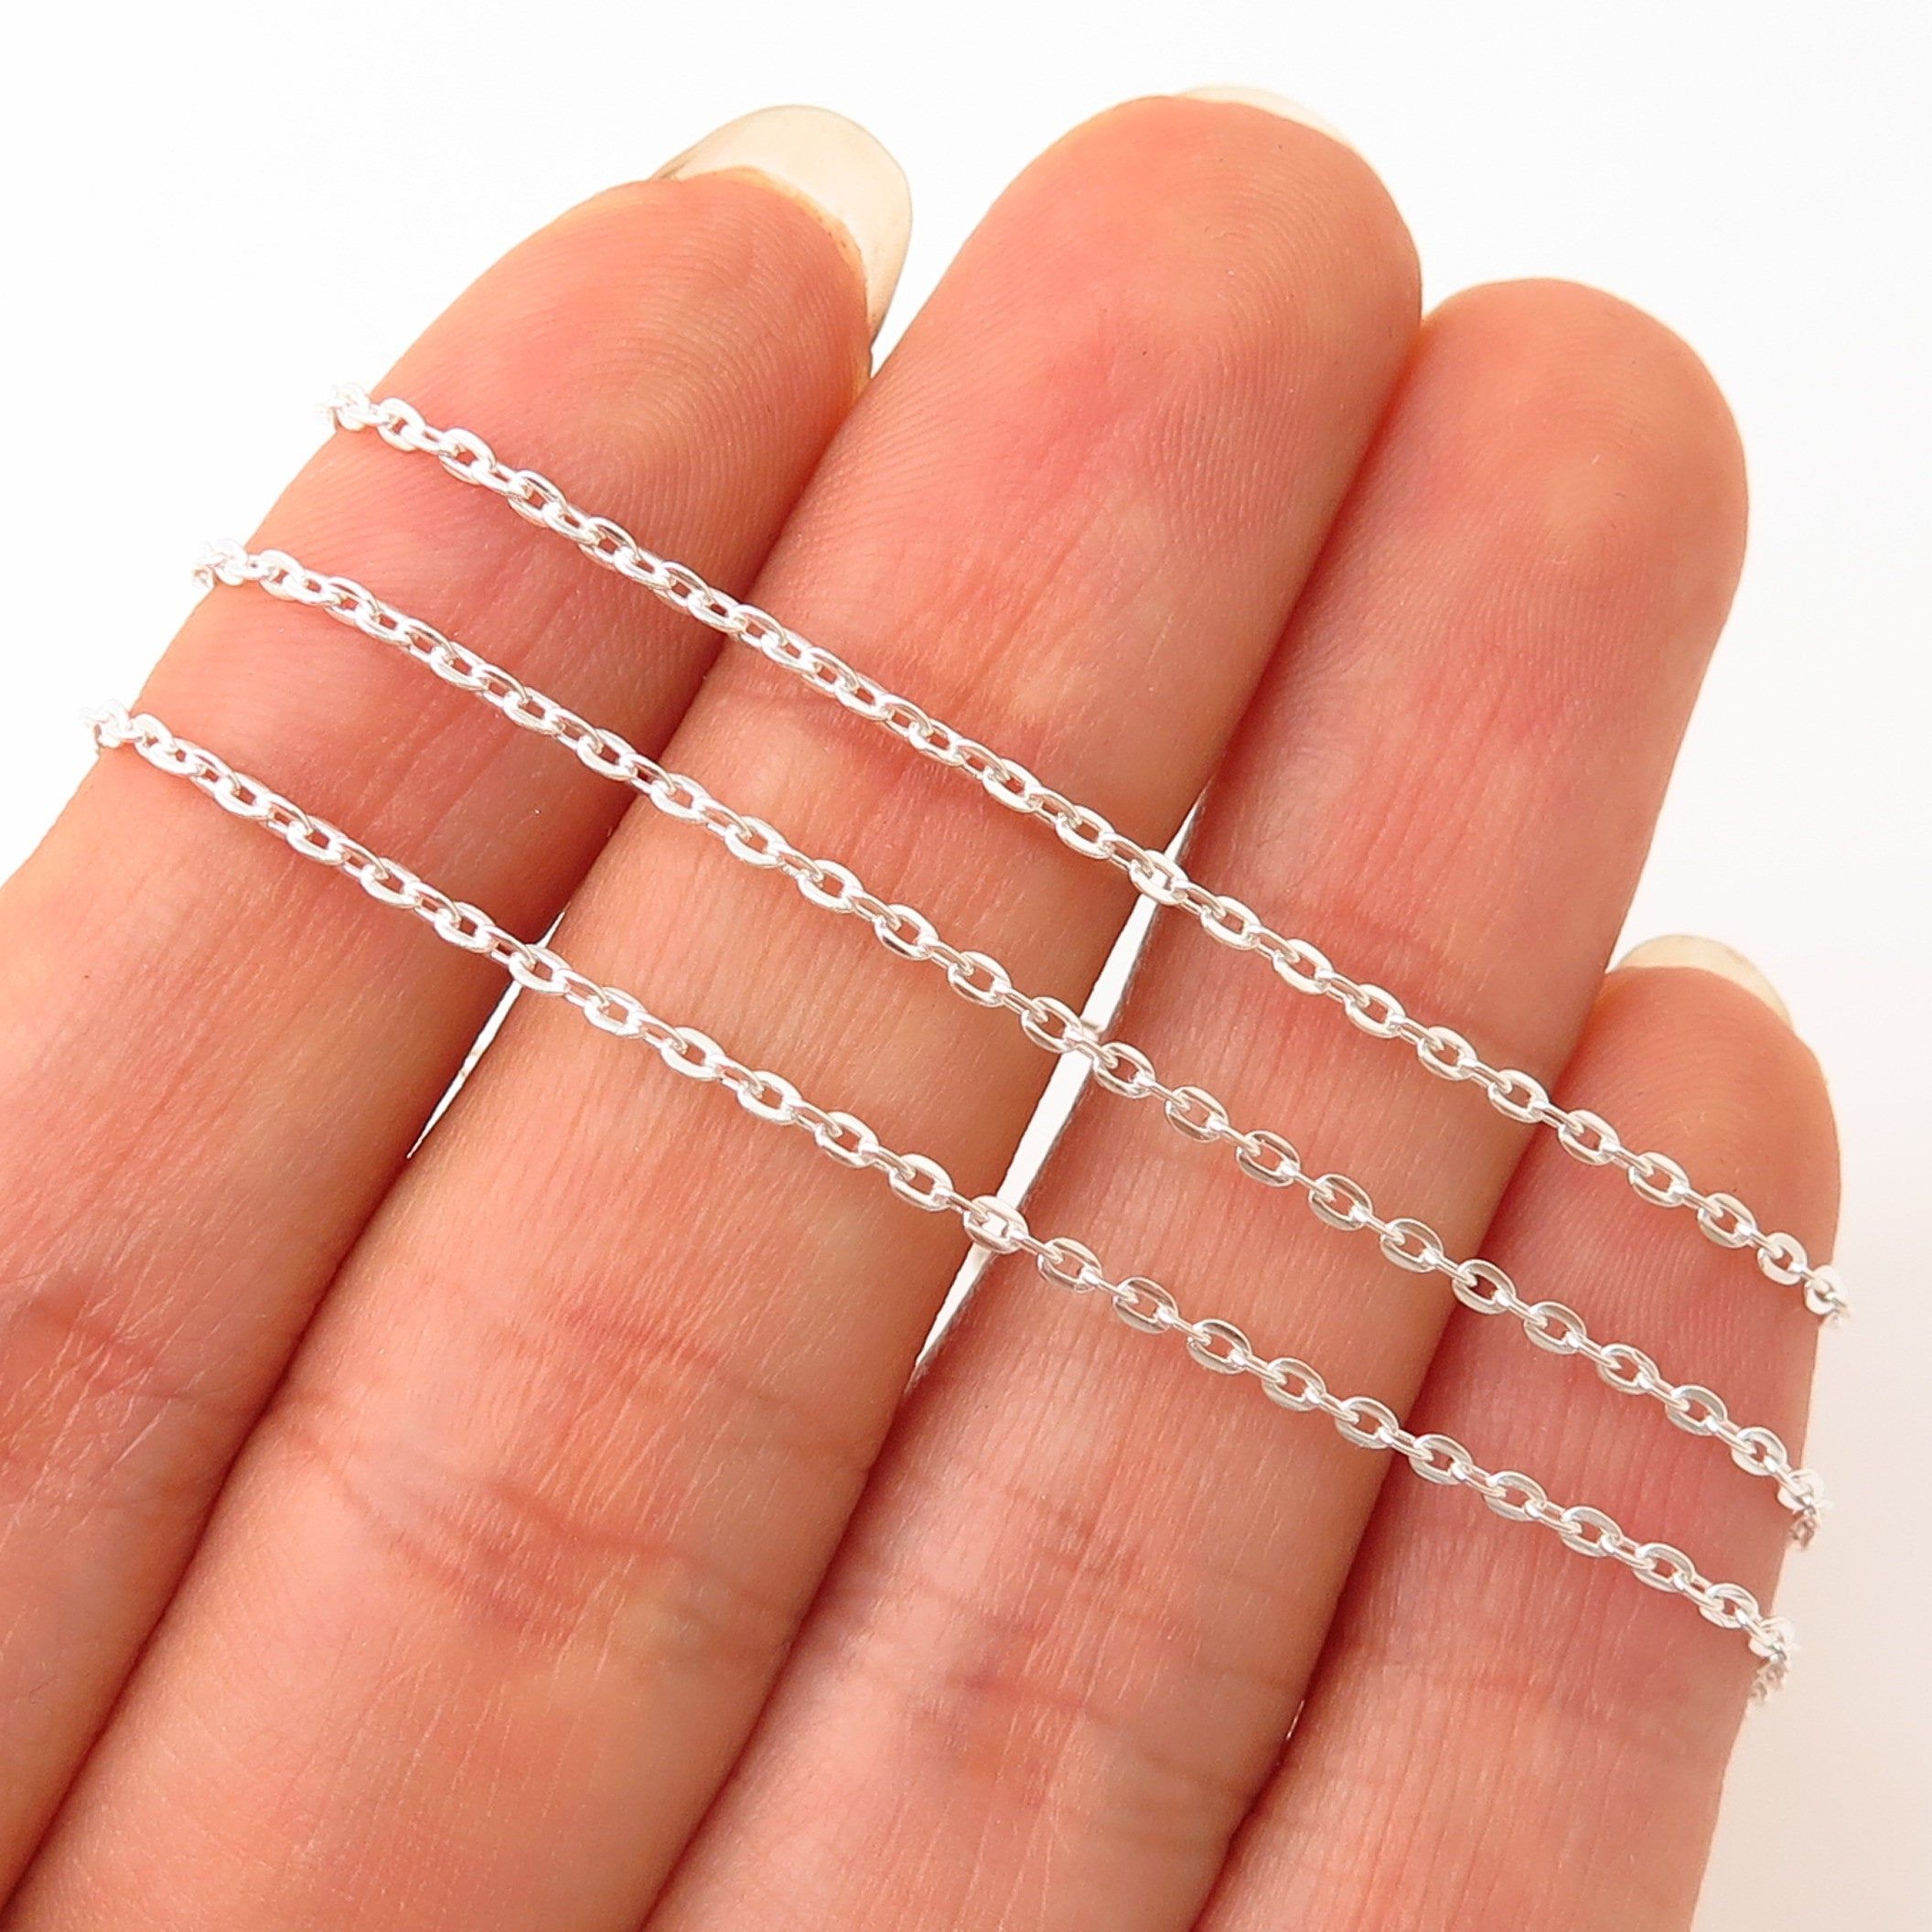 925 Sterling Silver Classic Cable Chain Necklaces 17" Intended For 2019 Classic Cable Chain Necklaces (View 2 of 25)